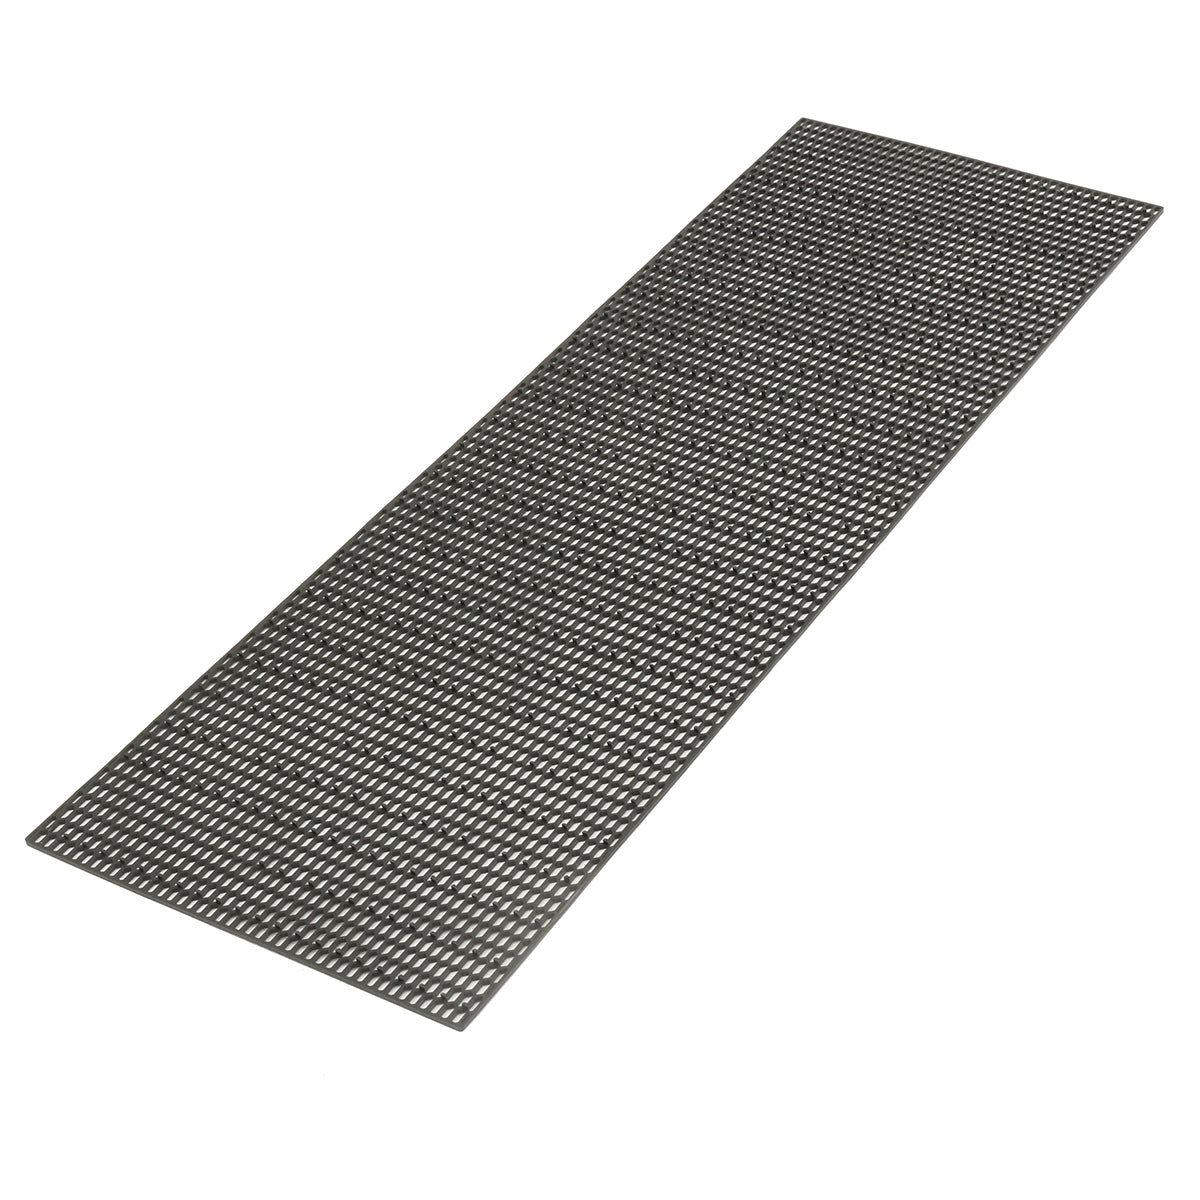 Dim Gray 120X40cm ABS Plastic Car Styling Air Intake Racing Honeycomb Meshed Grille Spoiler Bumper Hood Vent Universal